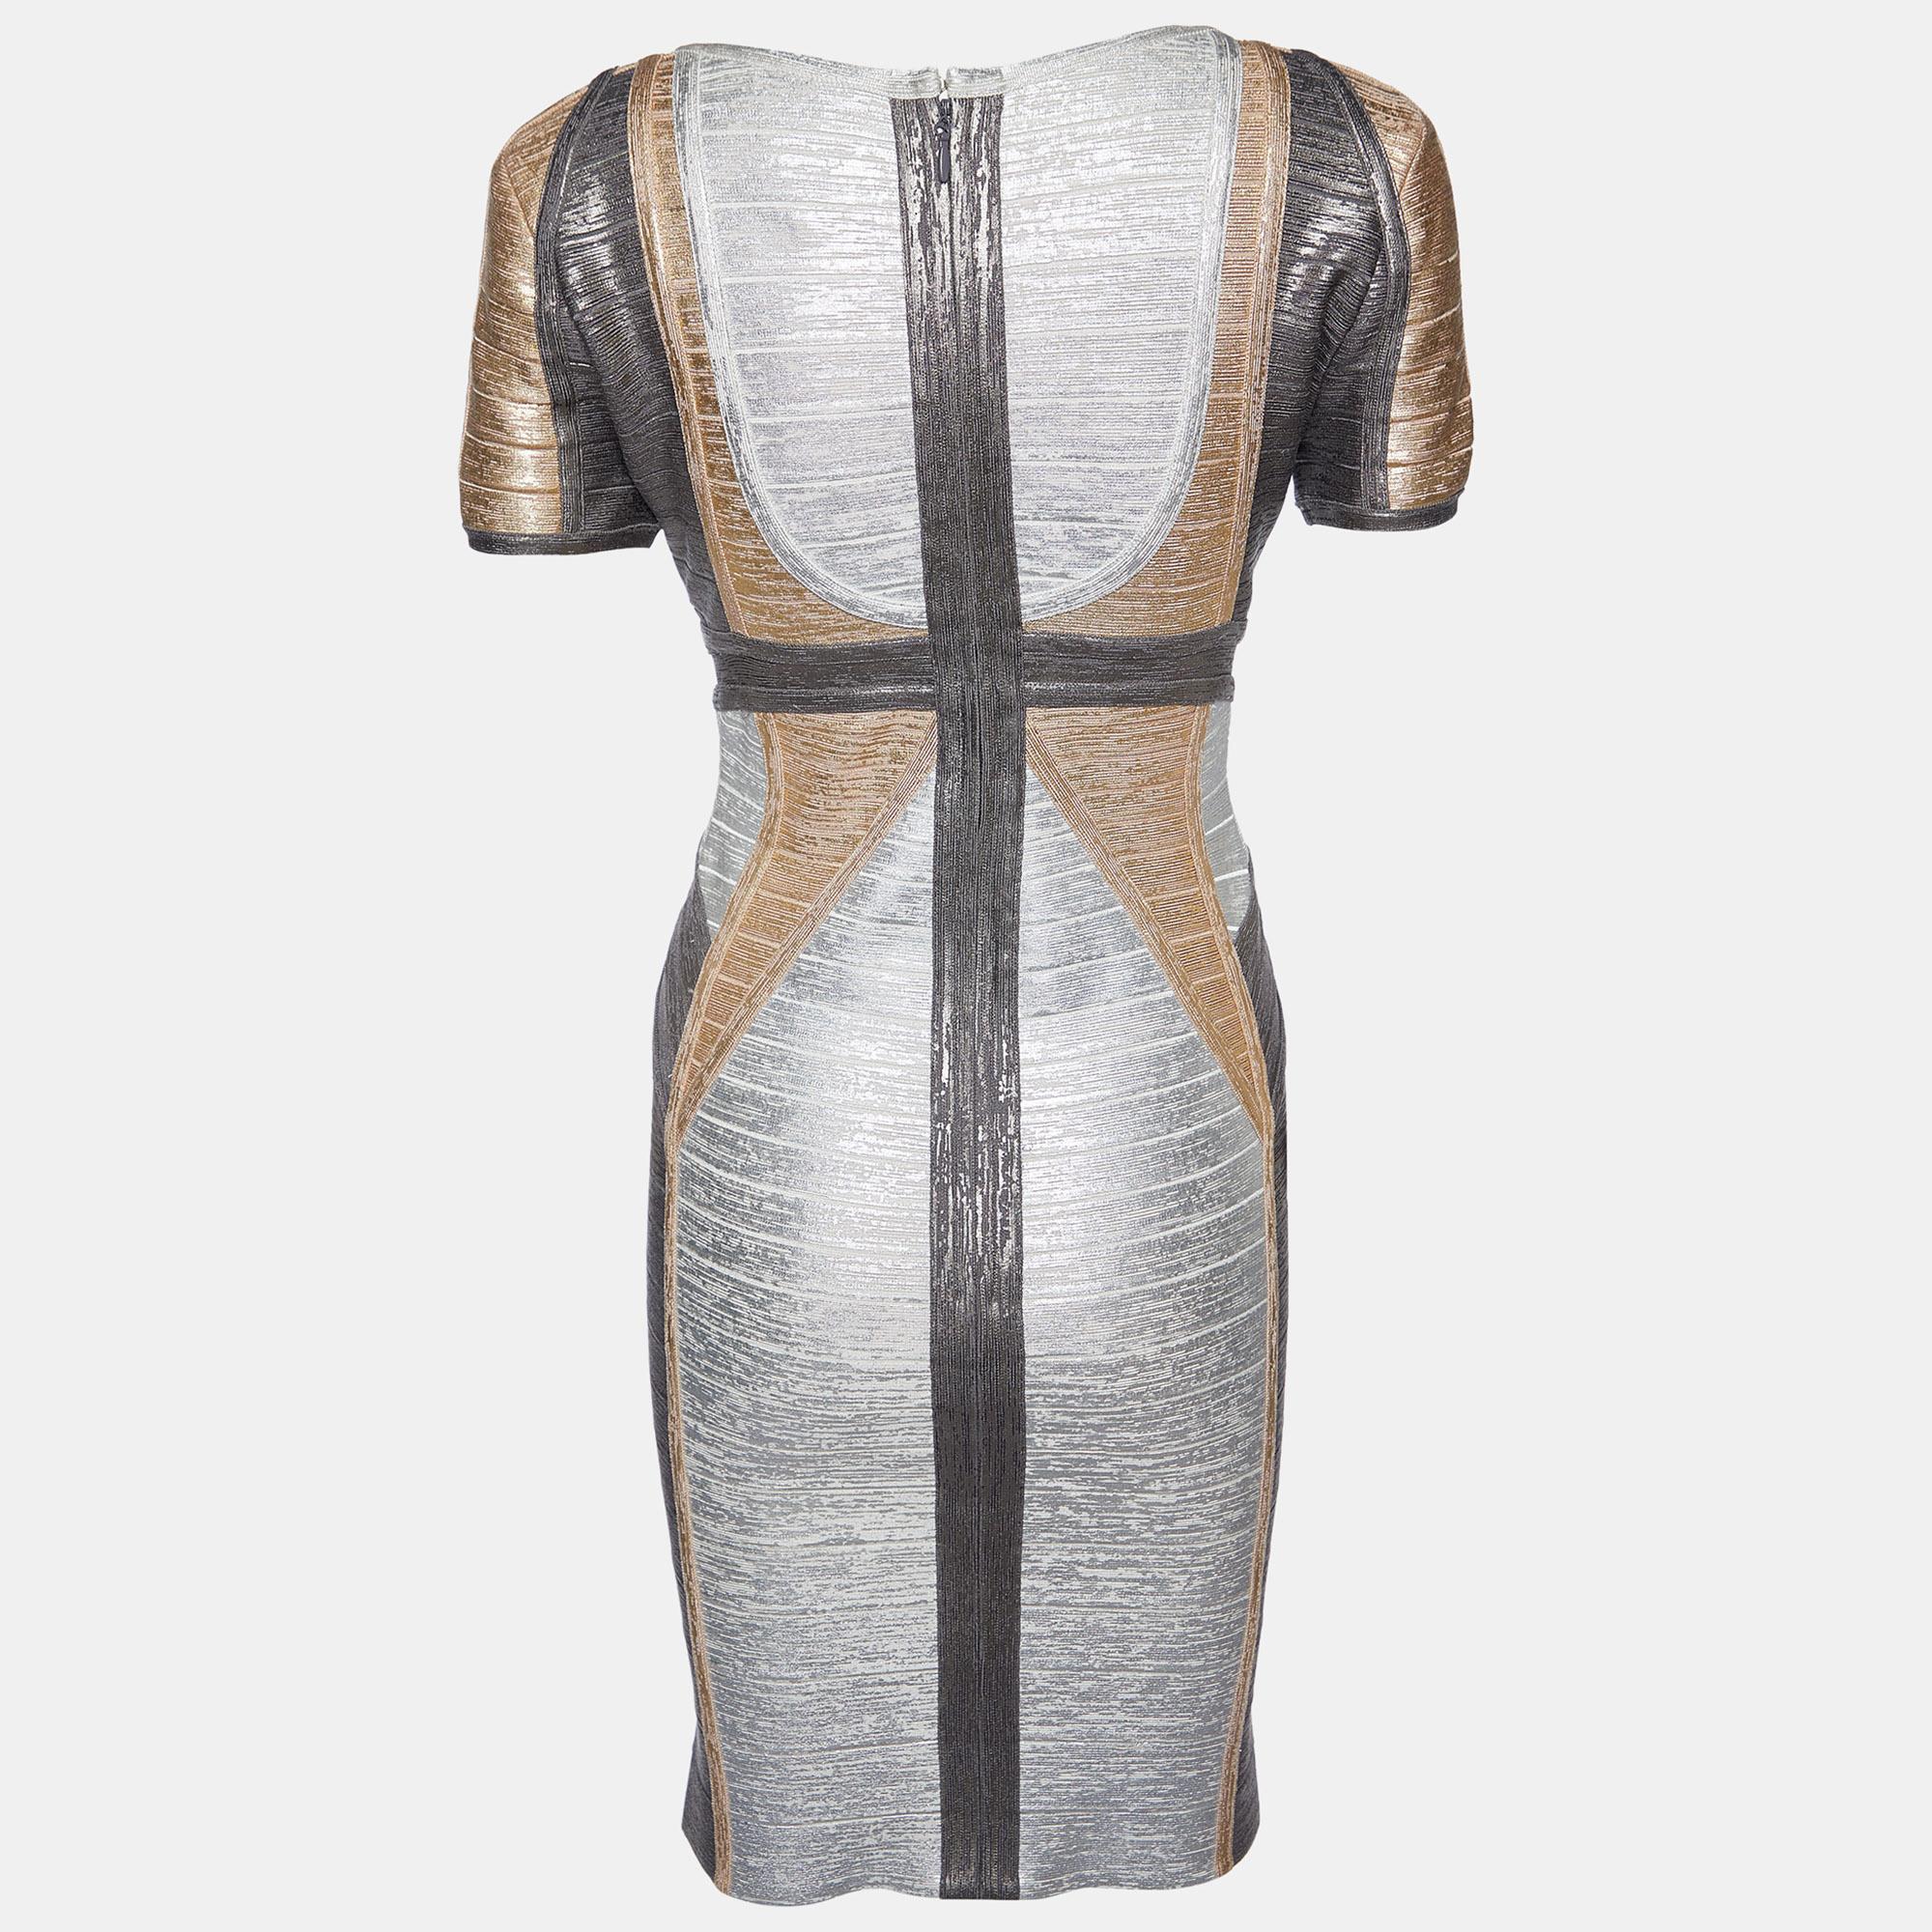 The Herve Leger dress exudes sophistication and allure. Crafted from premium fabric, it clings to the body's curves flawlessly, highlighting feminine silhouettes. The metallic foil design and flattering length add a touch of elegance, making it a